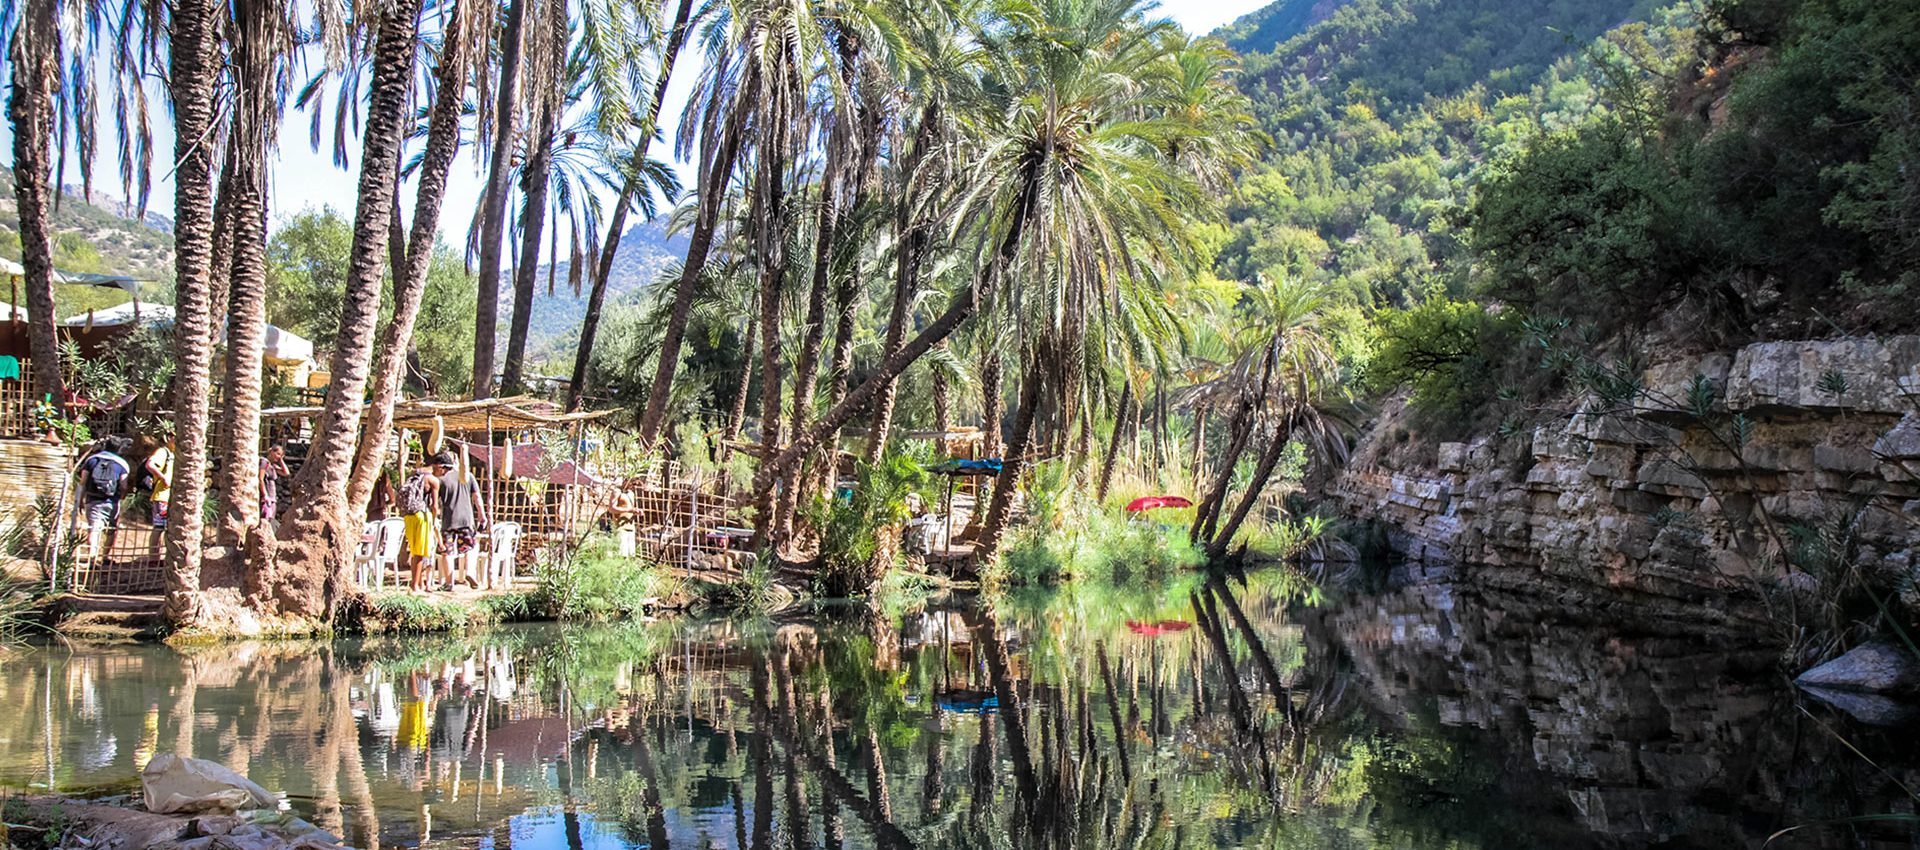 A drive through the Atlas Mountains will take us to Paradise Valley, this spot is famous for its natural beauty with an abundance of palm trees.